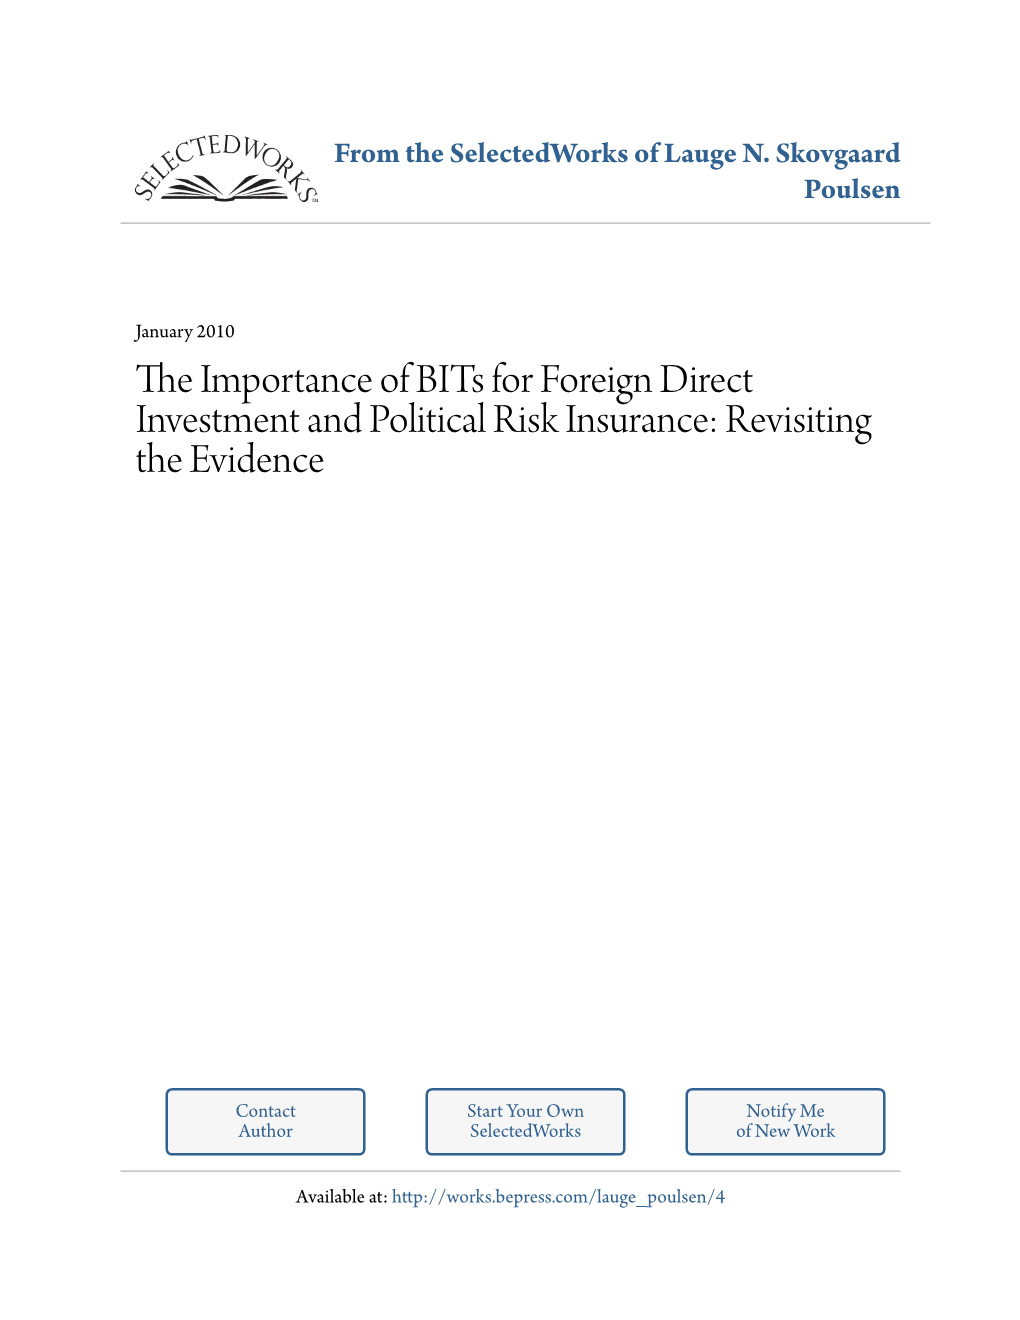 The Importance of Bits for Foreign Direct Investment and Political Risk Insurance: Revisiting the Evidence